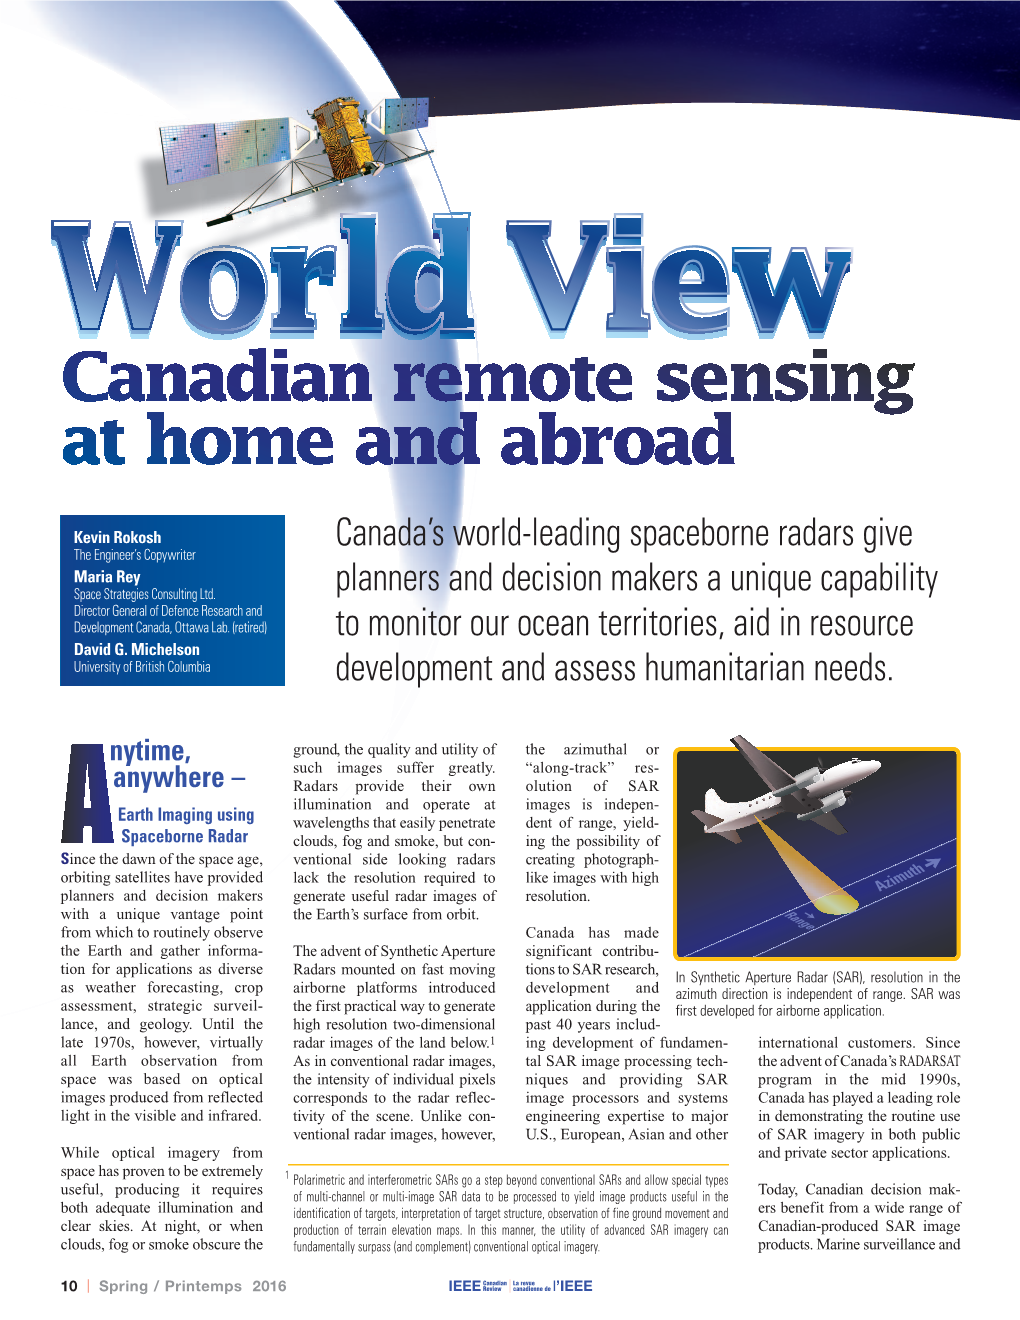 Canadian Remote Sensing at Home and Abroad